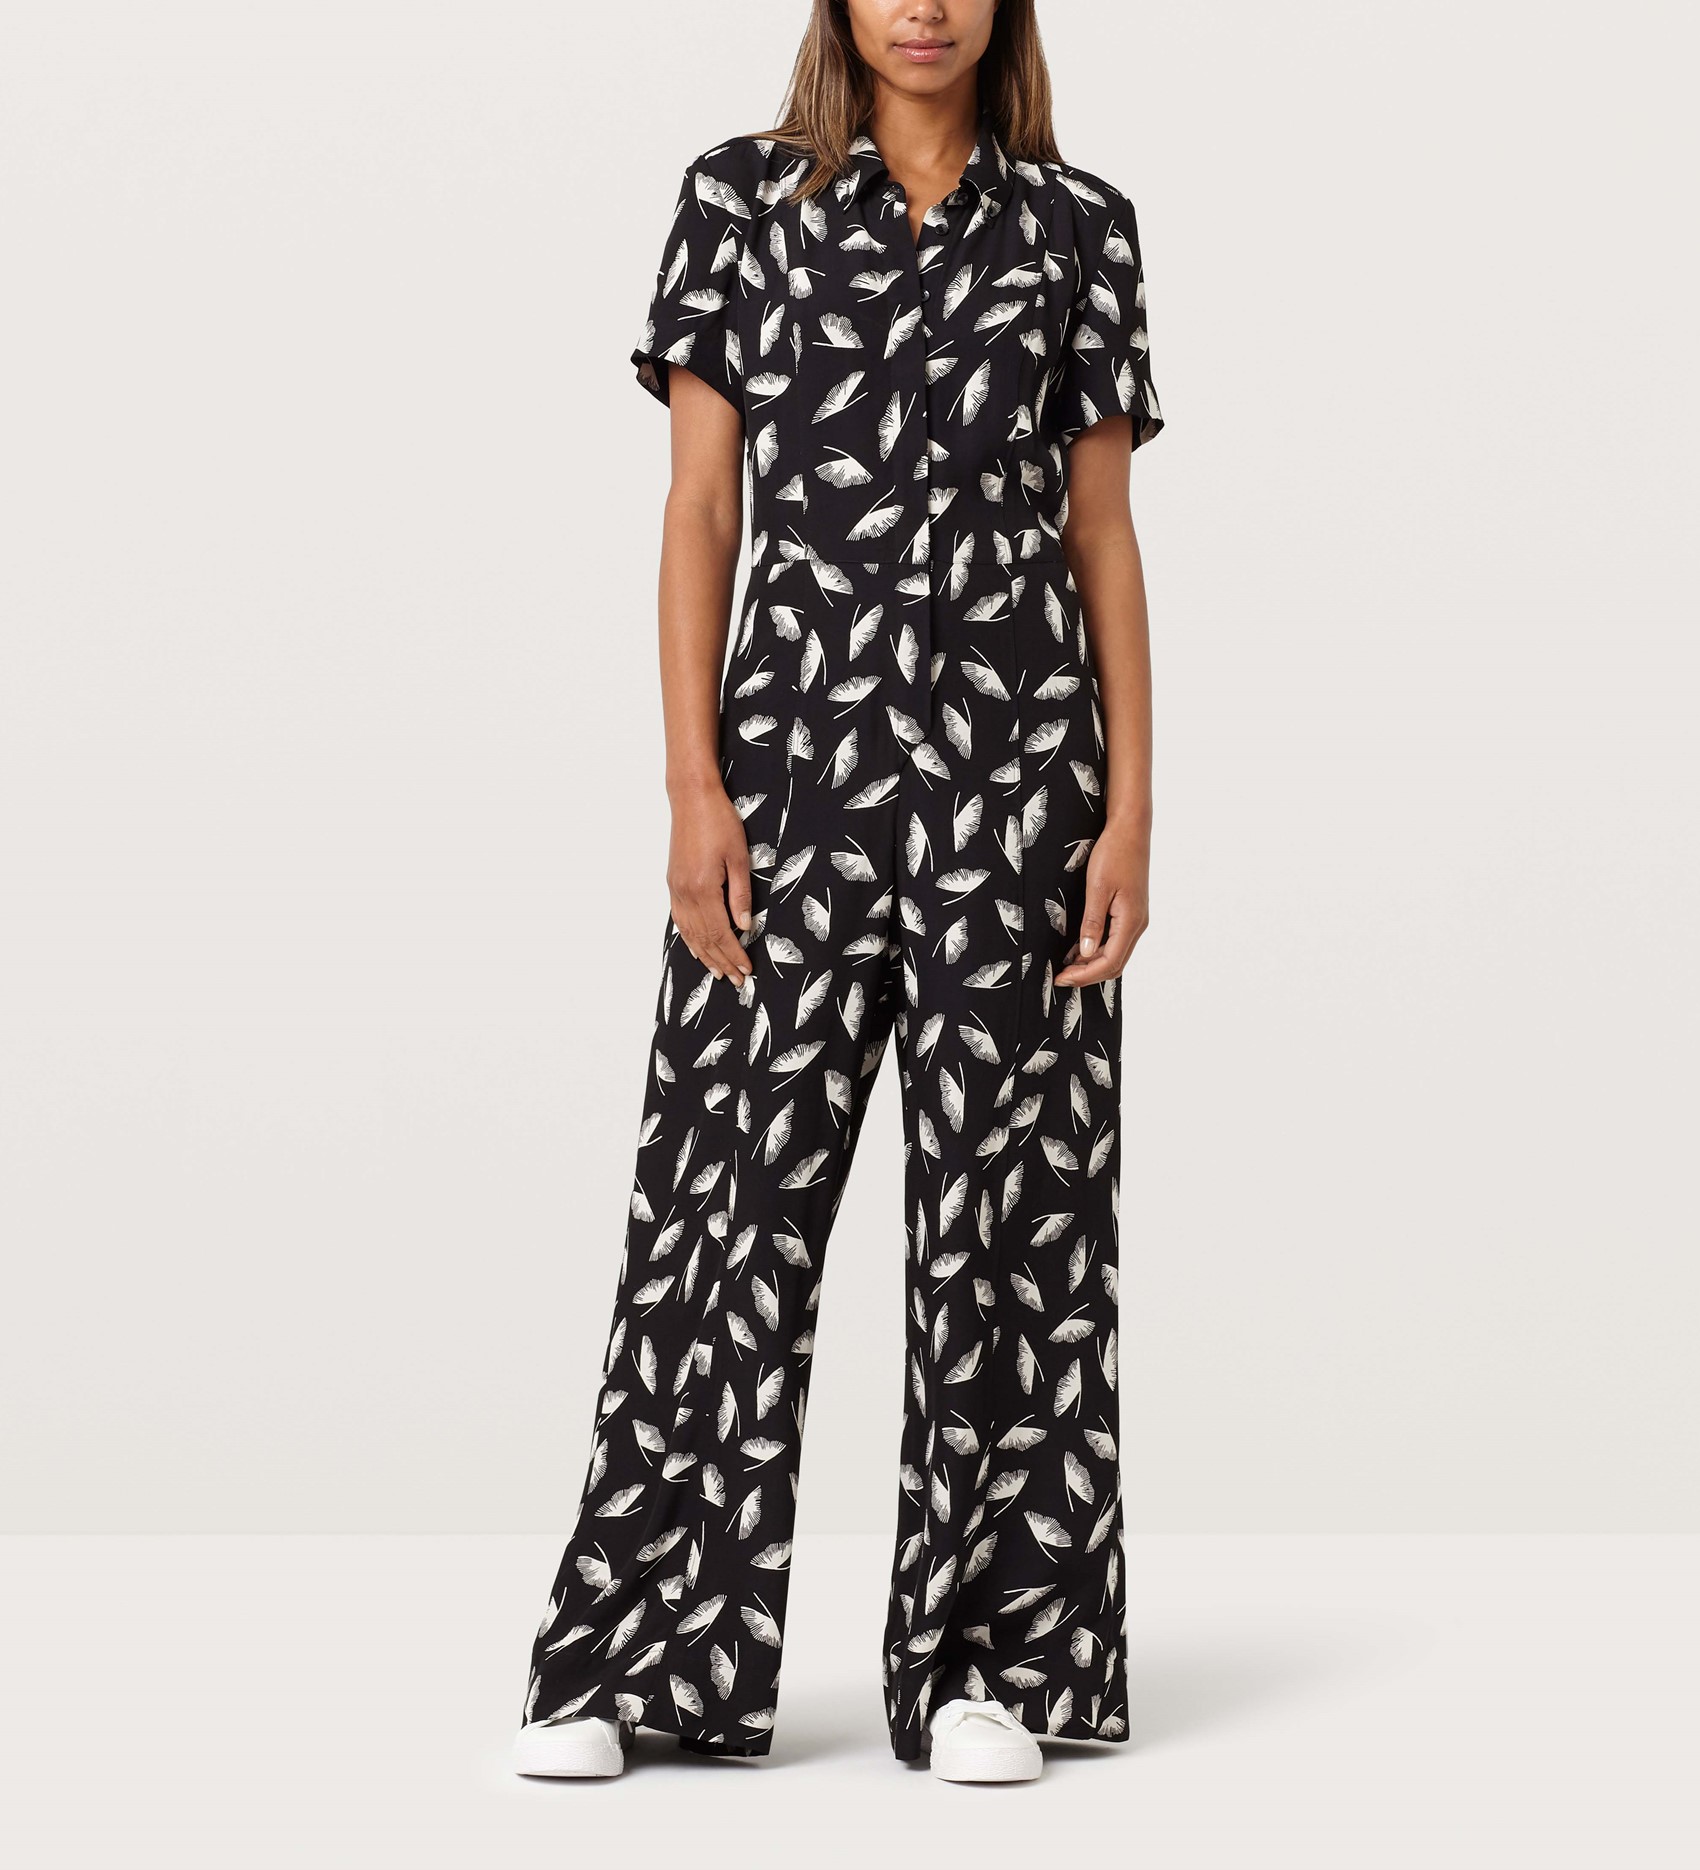 Satin Crepe Winter Feathers Jumpsuit with Wide Legs in Black Print ...